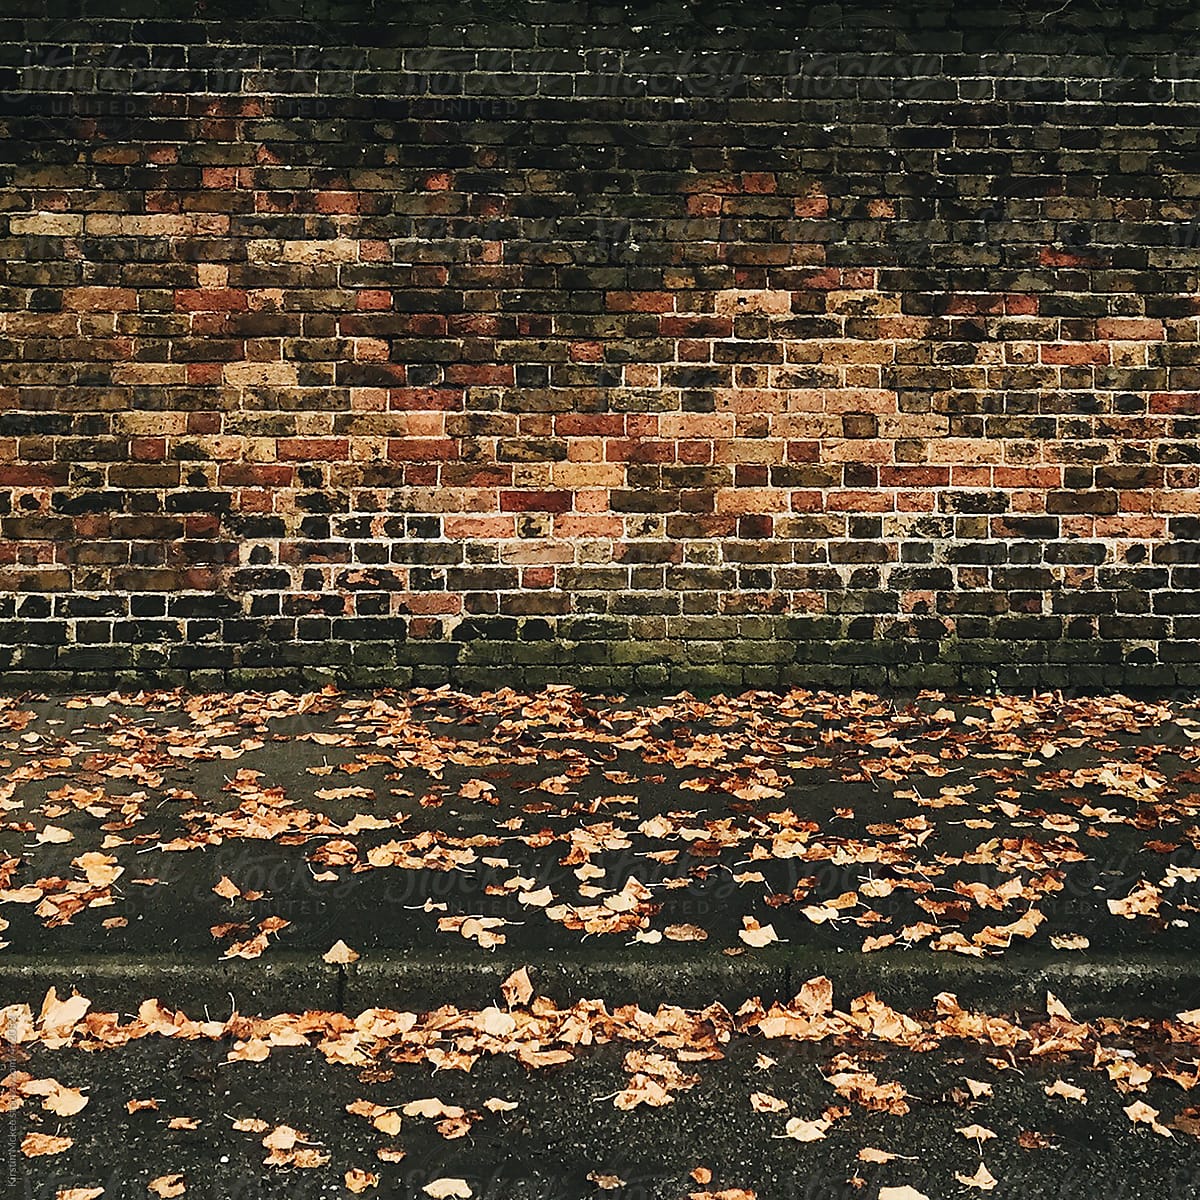 Fallen leaves next to a wall